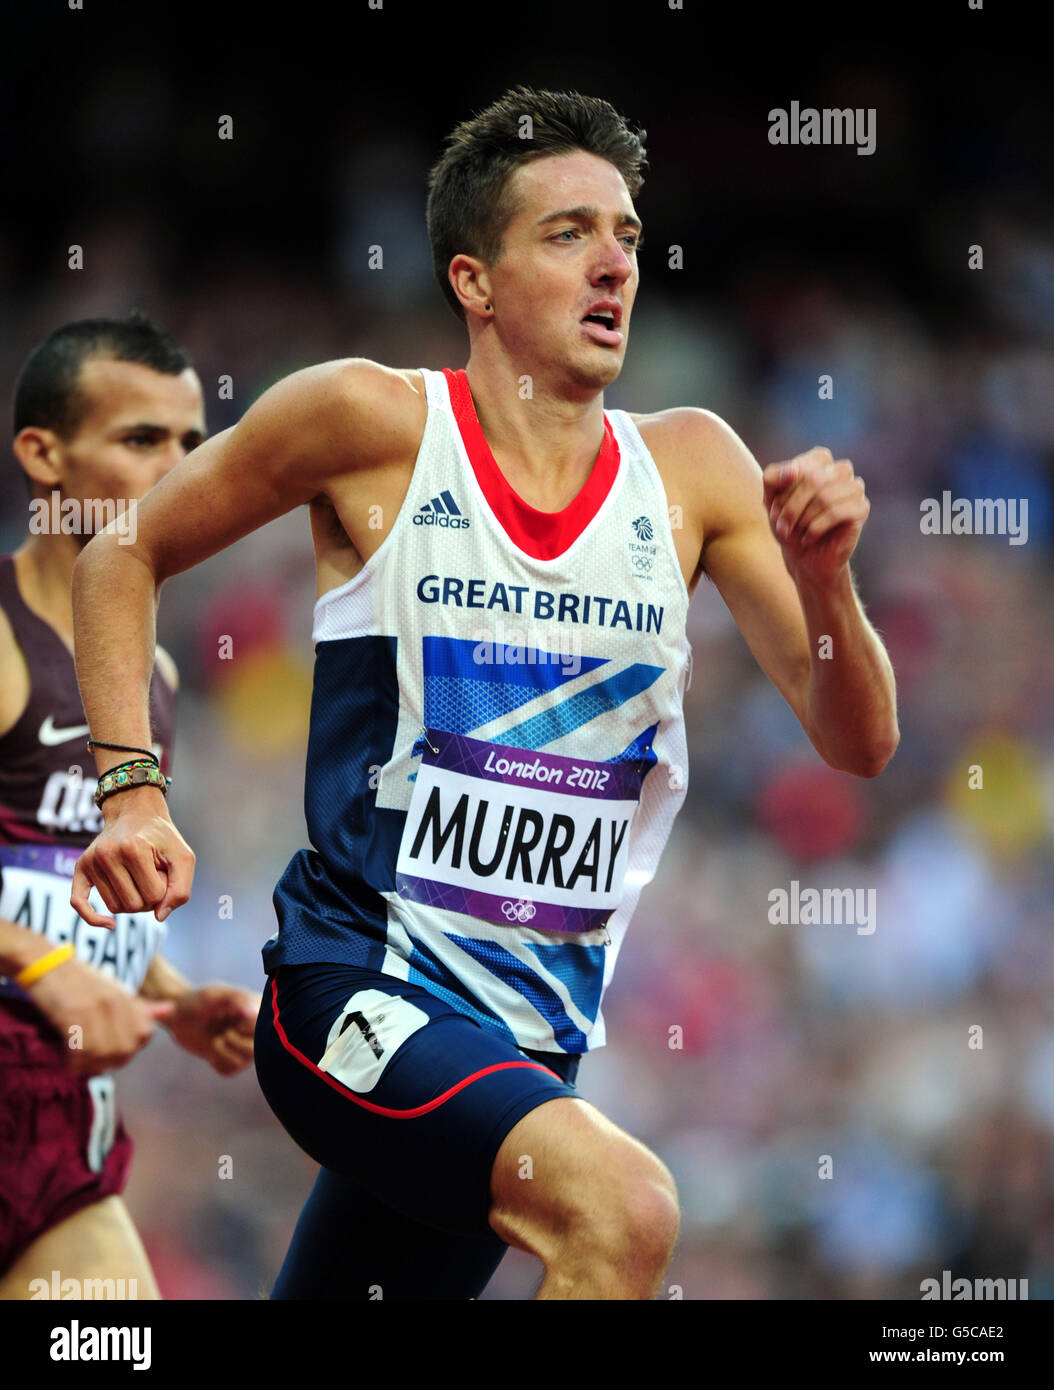 London Olympic Games - Day 7. Great Britain's Ross Murray competes in the Men's 1500m in the Olympic Stadium, London, on the seventh day of the London 2012 Olympics. Stock Photo